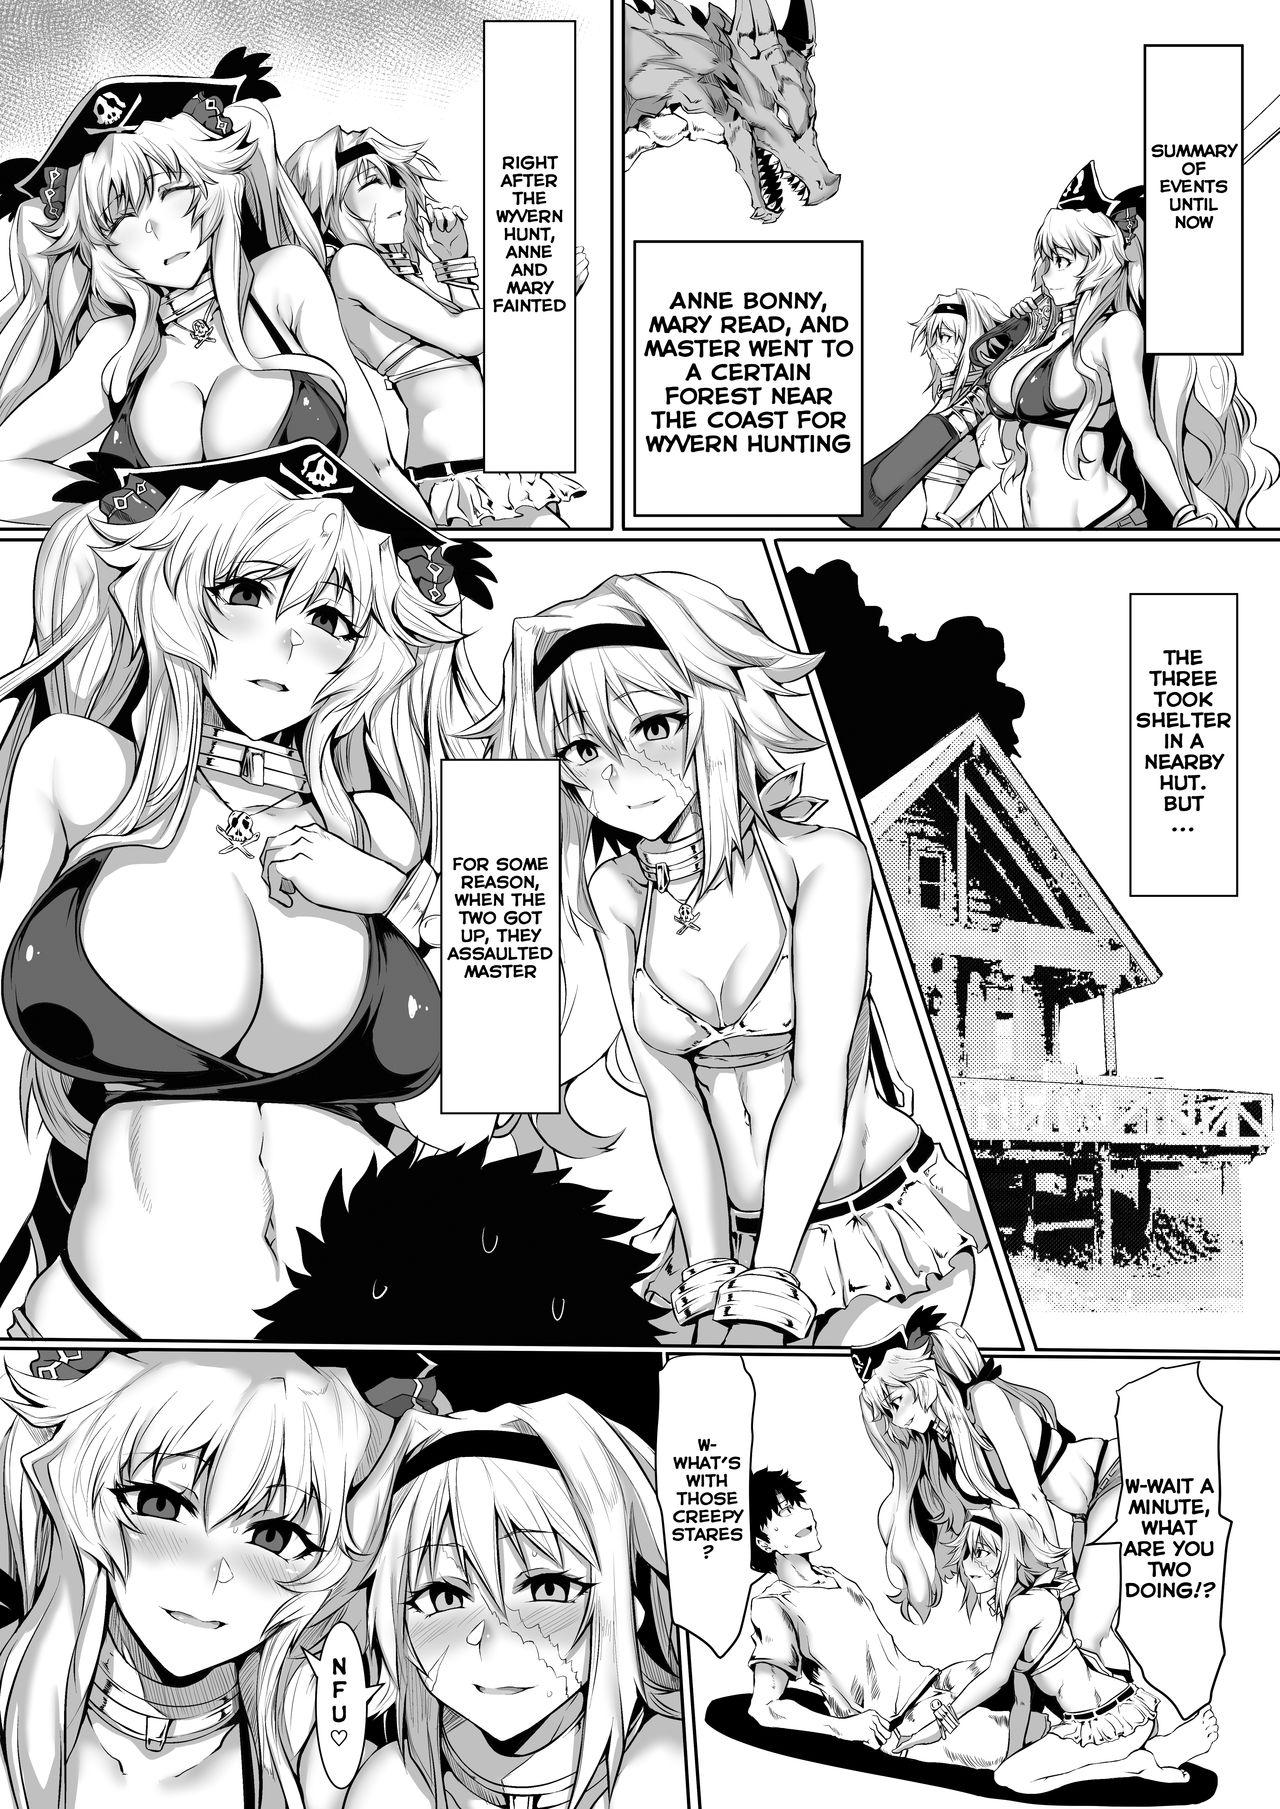 Best Blowjob Beach Flowers!! - Fate grand order Rough Sex - Page 2